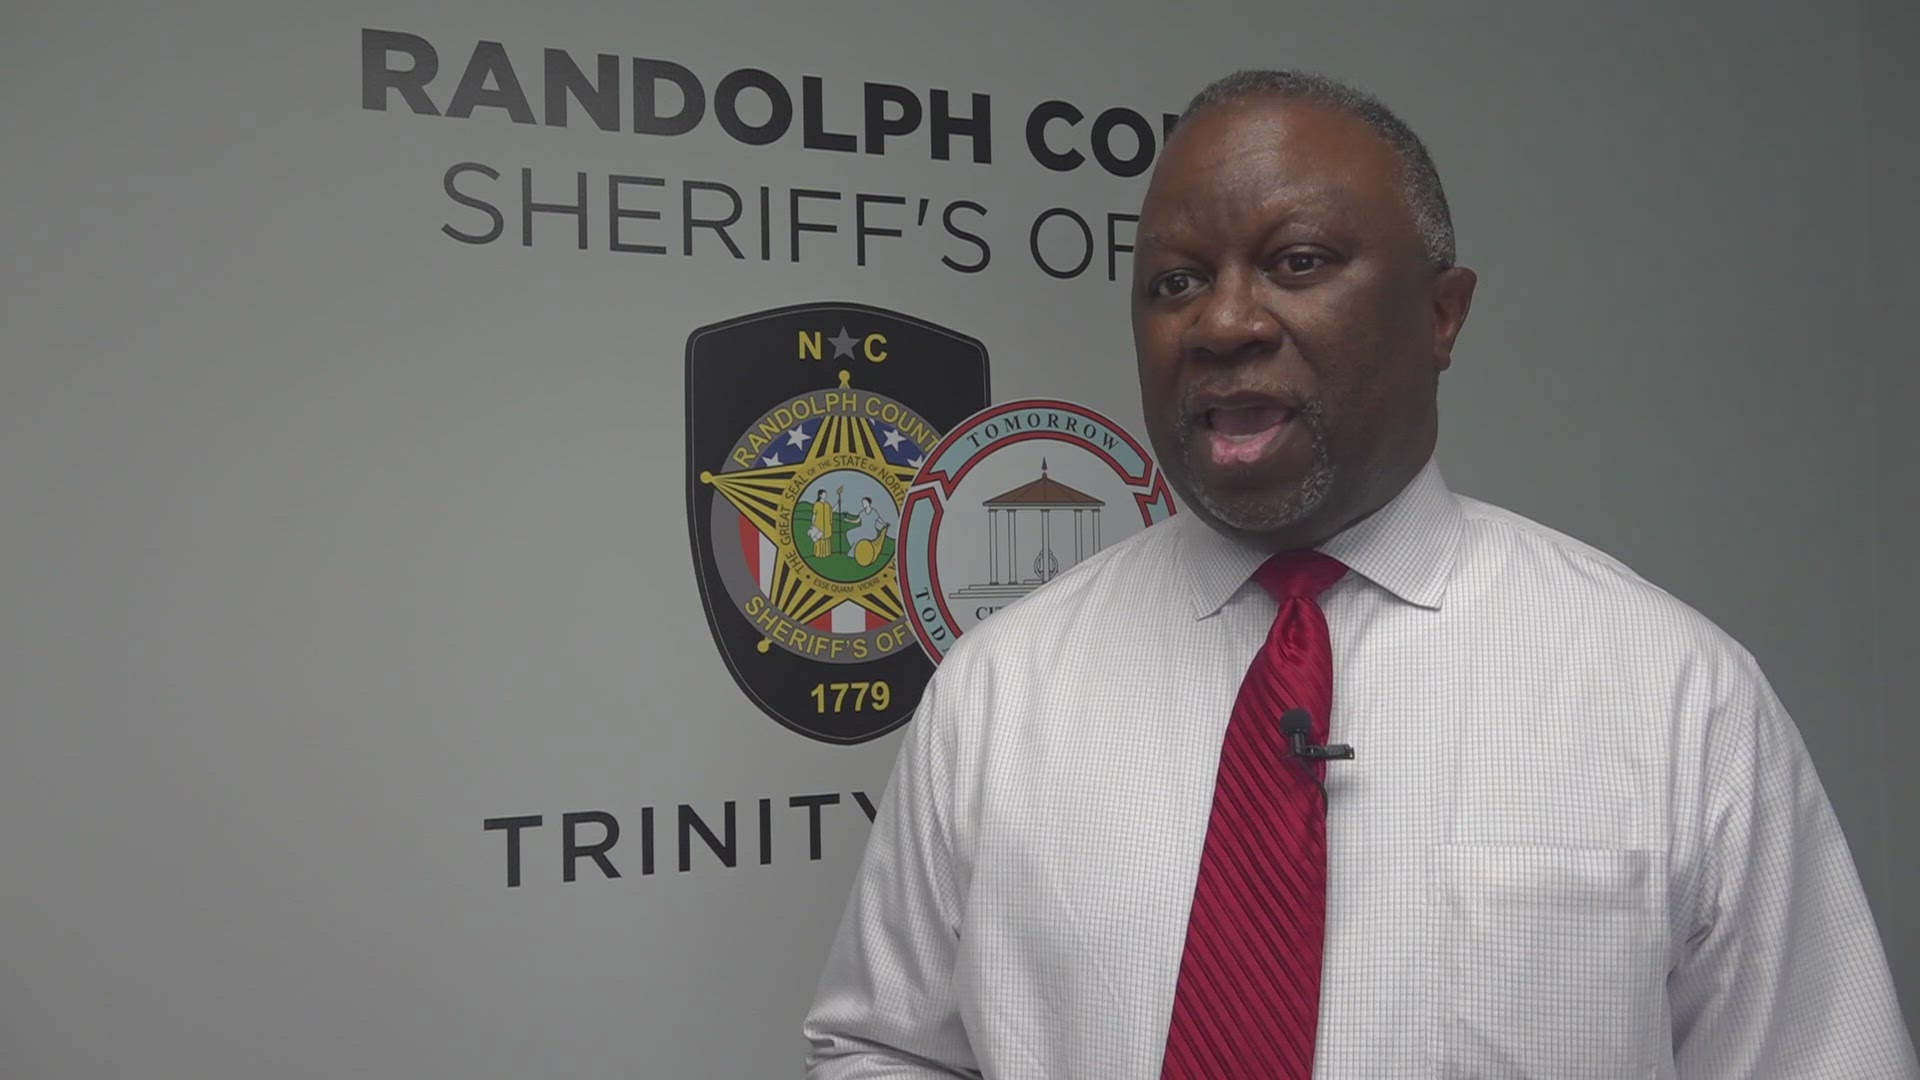 The new substation is a partnership between the city of Trinity and the Randolph County Sheriff's Office to help increase law enforcement presence within city limits